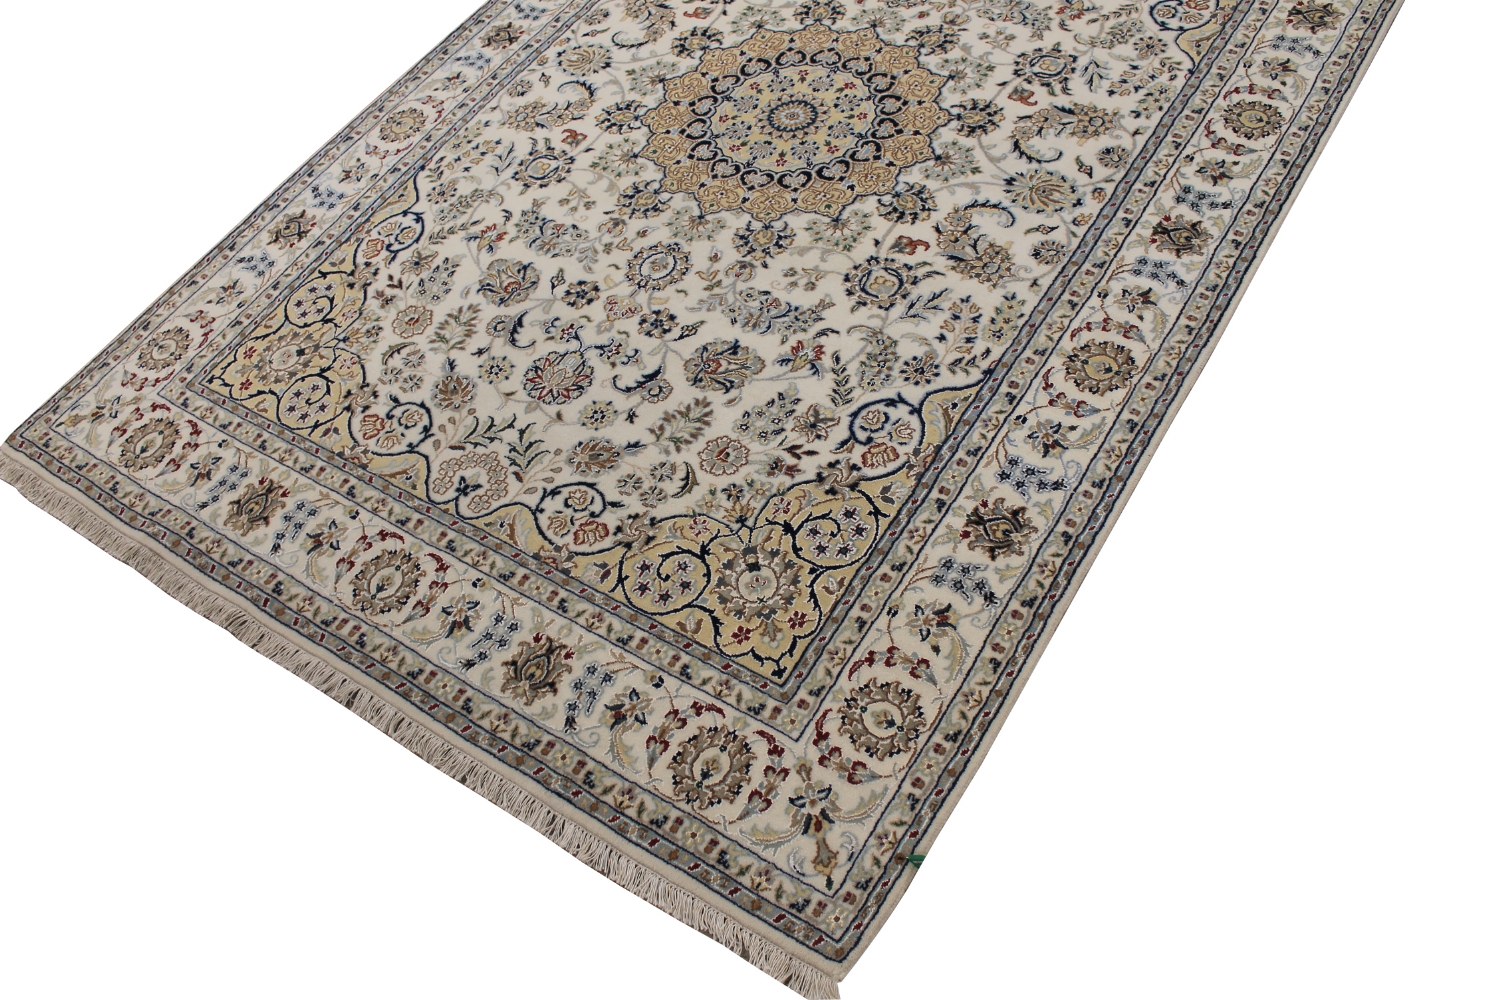 5x7/8 Traditional Hand Knotted Wool Area Rug - MR028301